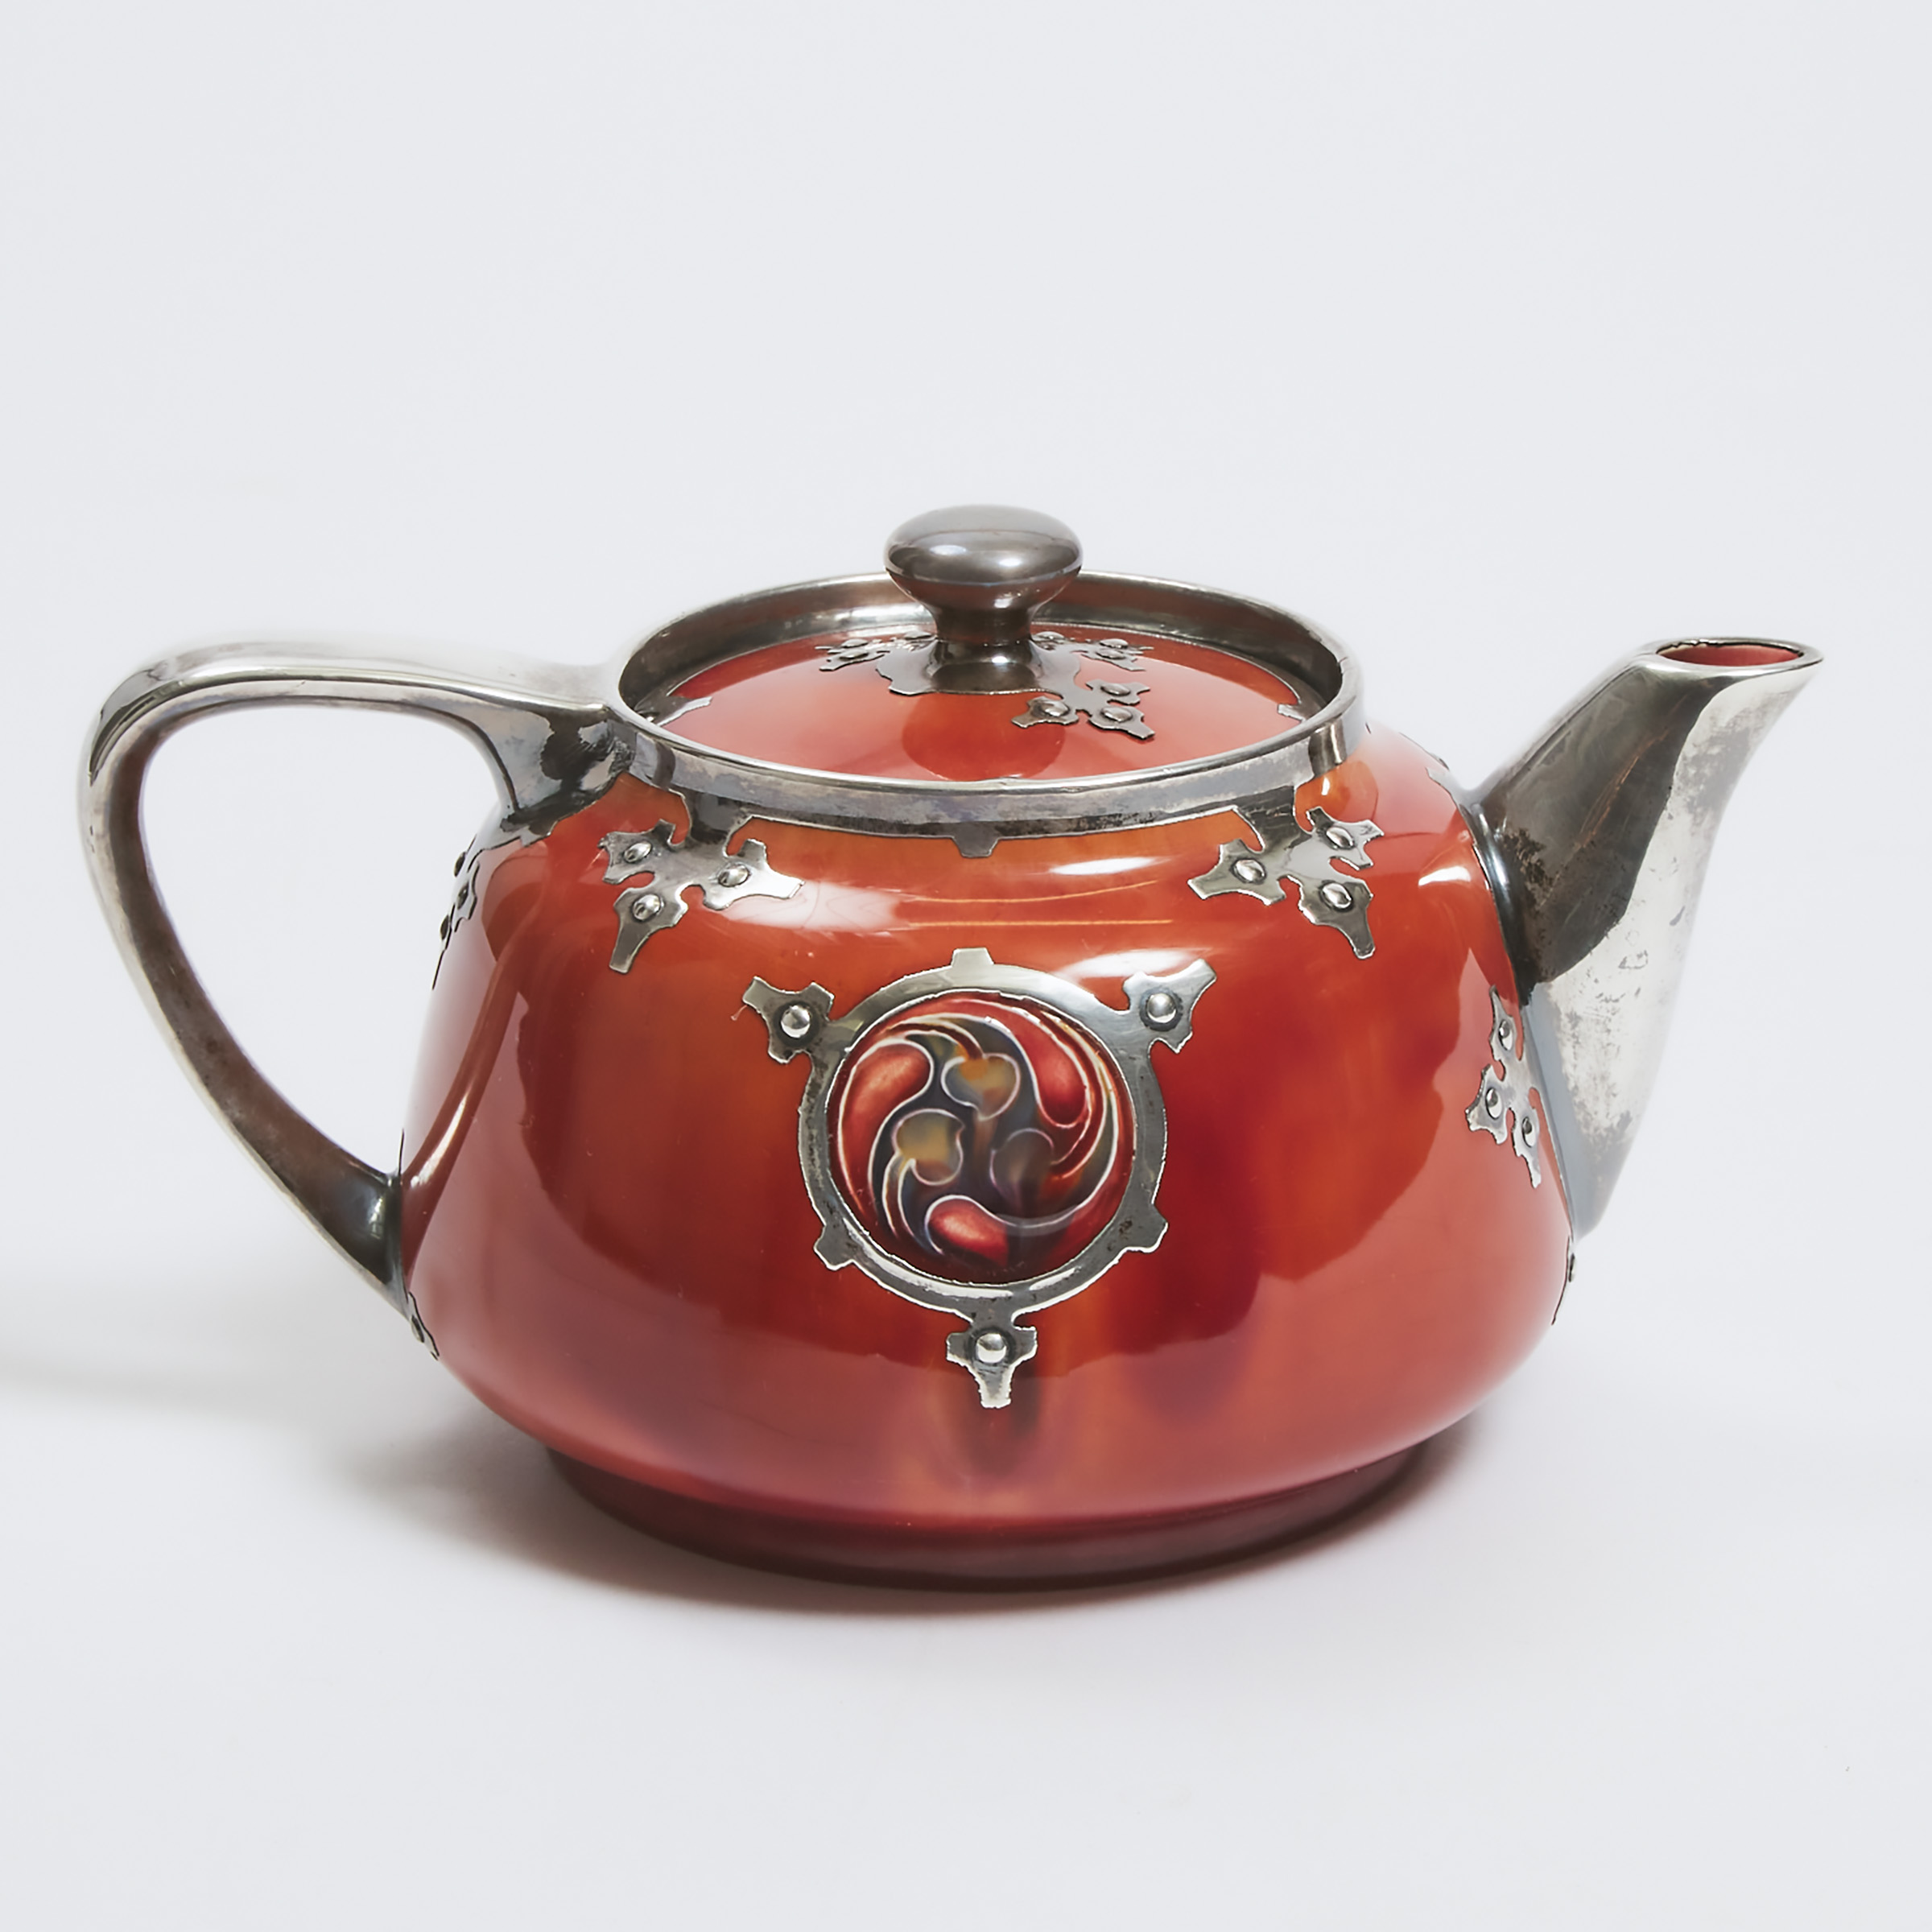 Macintyre Moorcroft Silver Overlaid Red Flamminian Teapot, for Liberty & Co., 1906-13